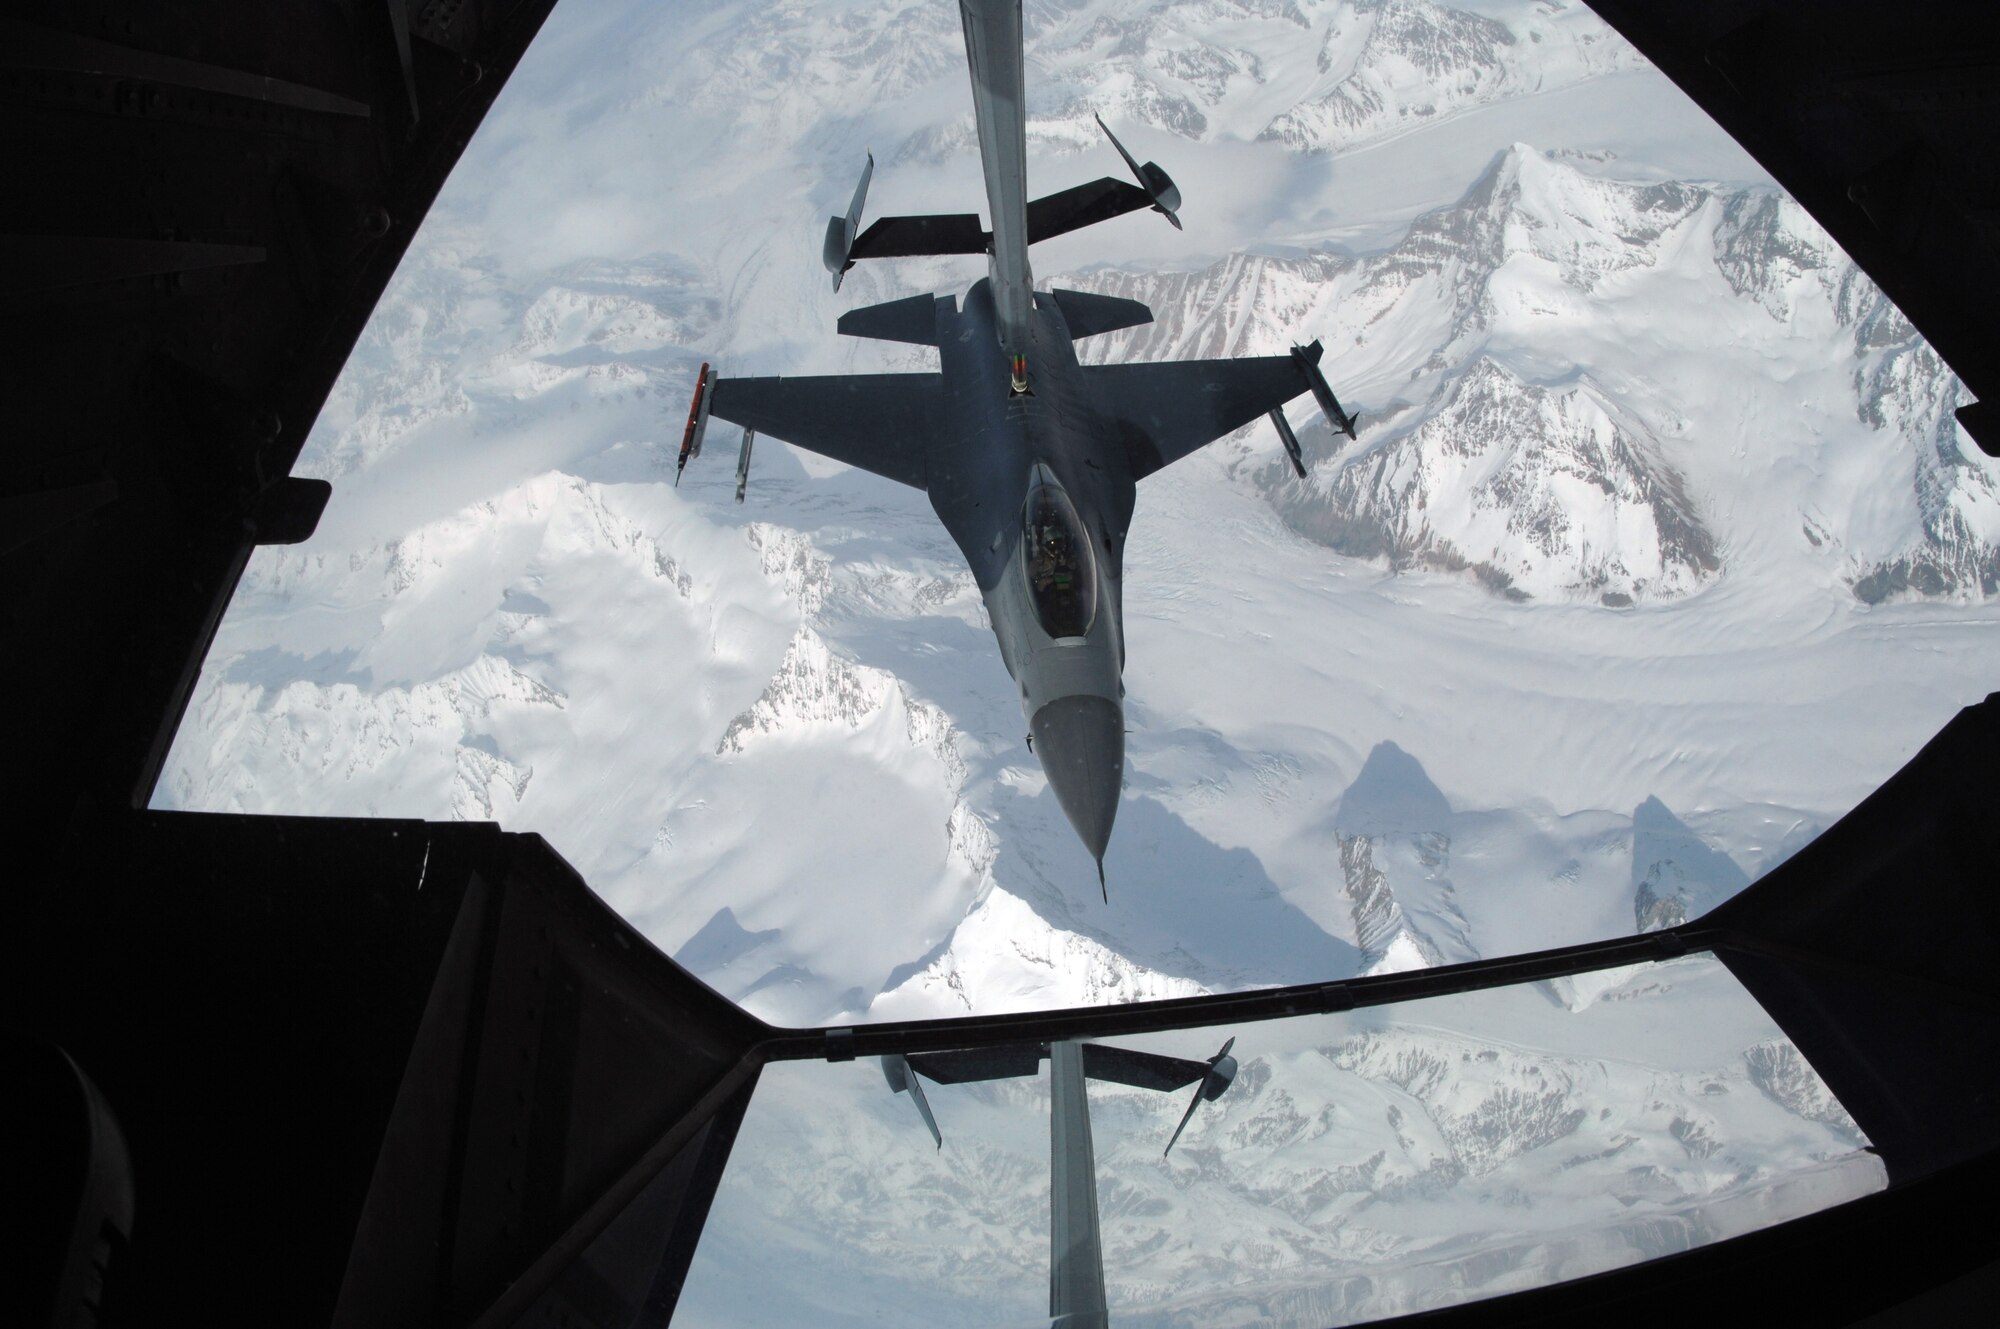 EIELSON AIR FORCE BASE, Alaska -- An F-16C, 18th Fighter Squadron, Eielson Air Force Base, Alaska, refuels from KC-10 Extender, call sign "Shaman Five One" during a refueling mission here on 18 April in support of Red Flag-Alaska 07-1. The KC-10 Extender is from McGuire Air Force Base, New Jersey and can refuel using both drouge and probe refueling in a single mission which makes it a very versitile refueling platform. Red Flag-Alaska is a Pacific Air Forces-directed field training exercise for U.S. forces flown under simulated air combat conditions. (U.S. Air Force photo by Staff Sgt. Joshua Strang)